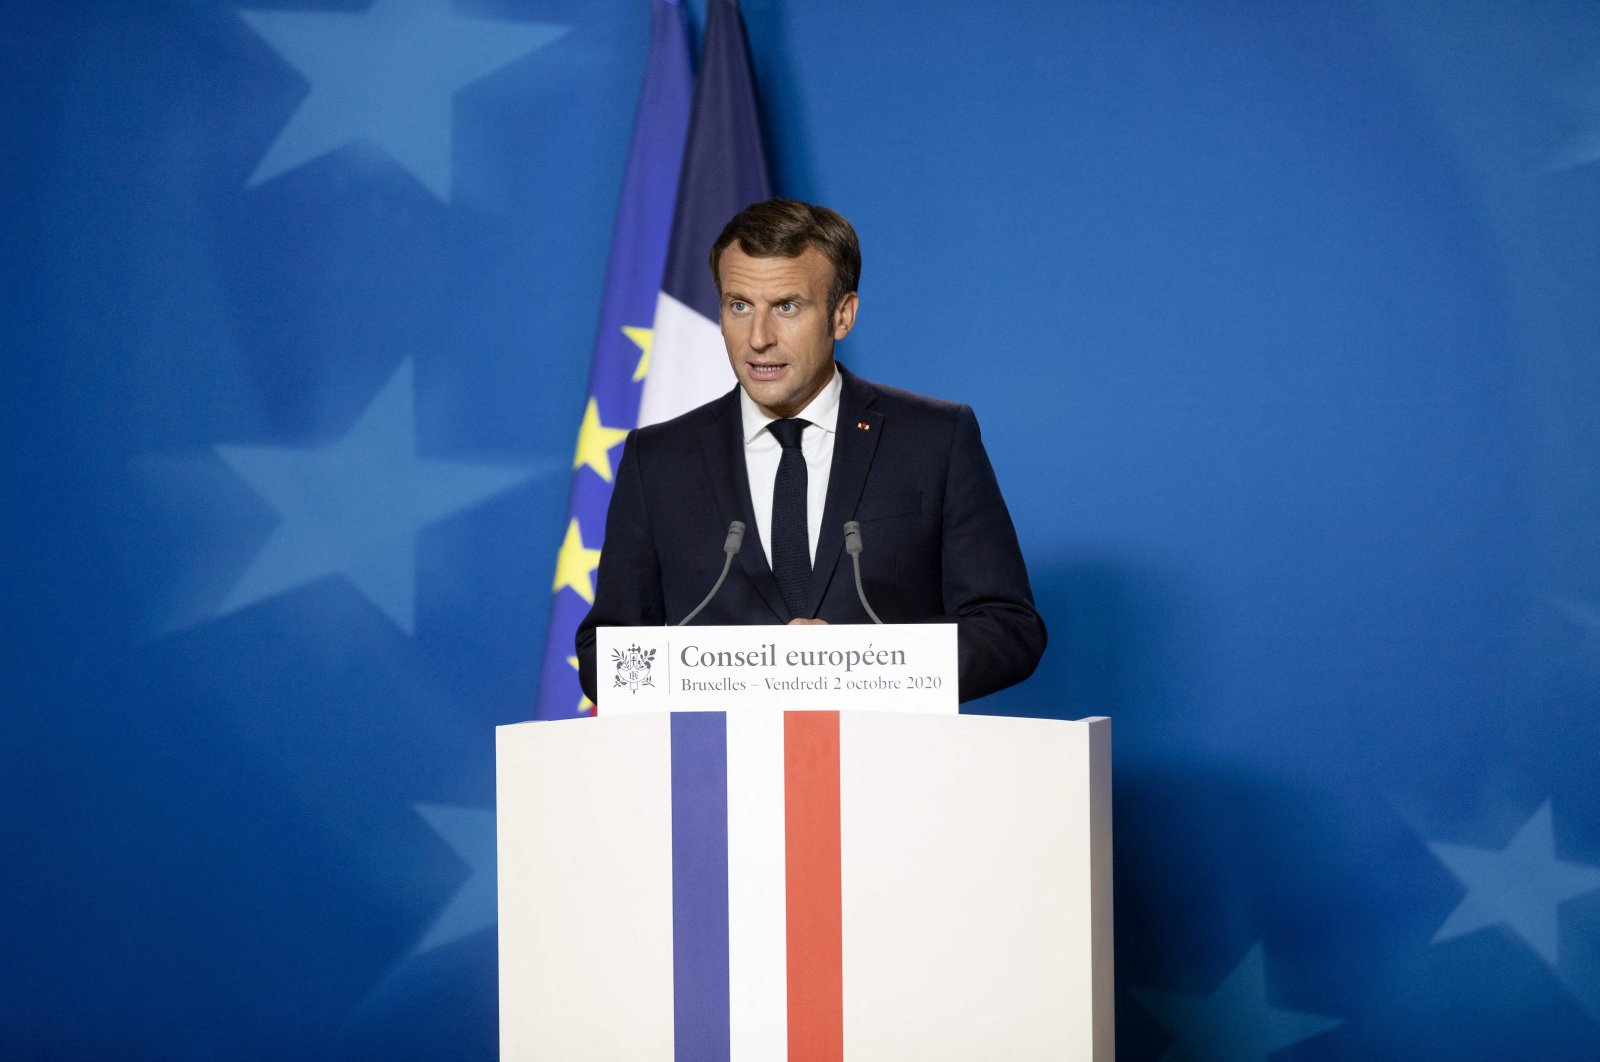 French President Emmanuel Macron speaks at the end of the first day of an EU summit, in Brussels, Belgium, Oct. 2, 2020. (Reuters Photo)